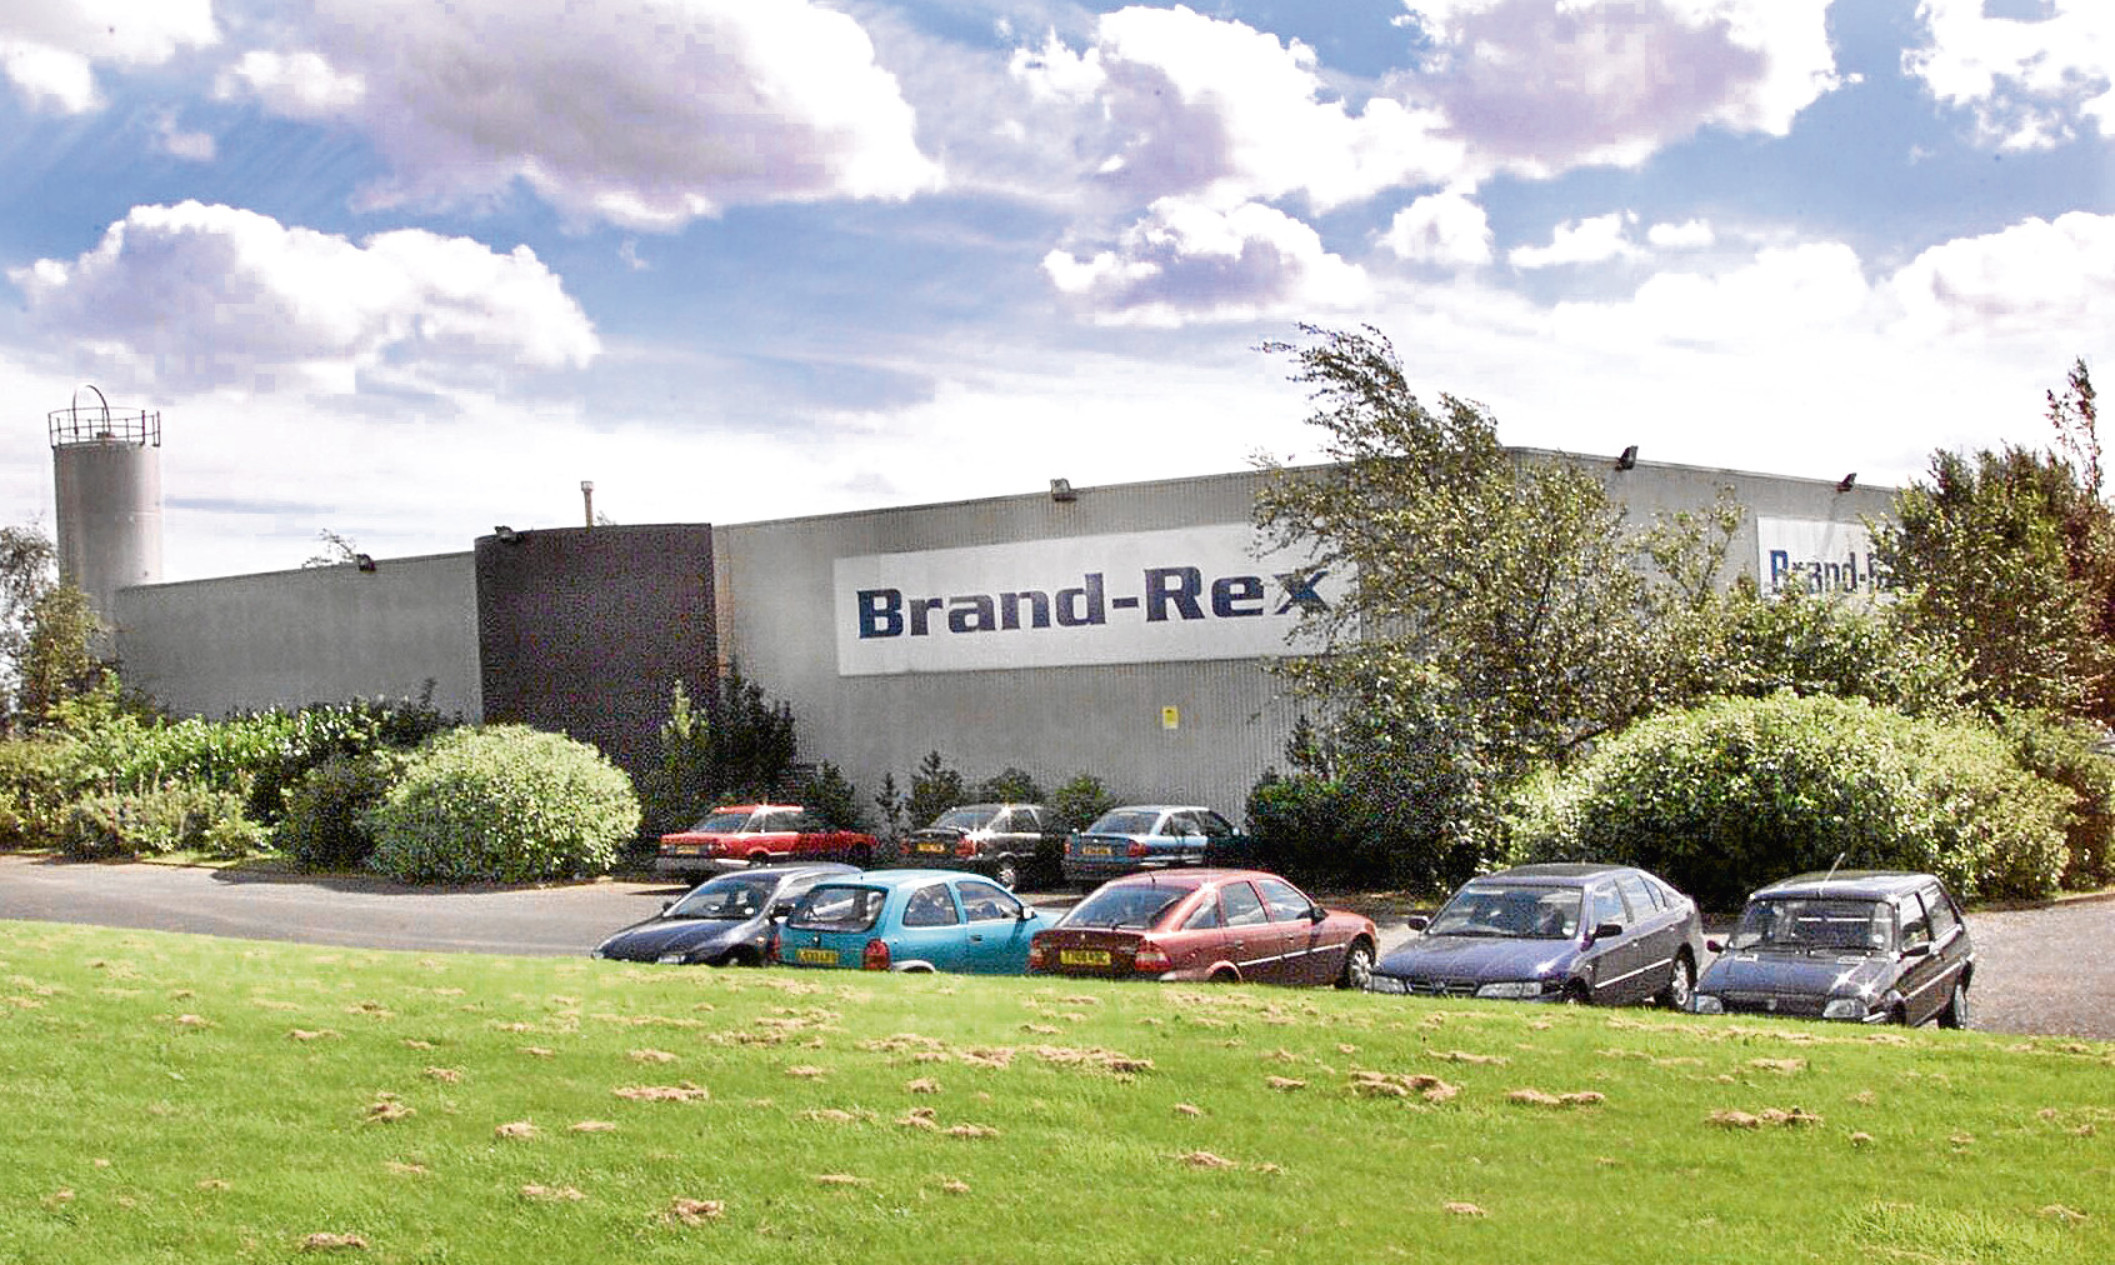 The Brand-Rex site in Glenrothes